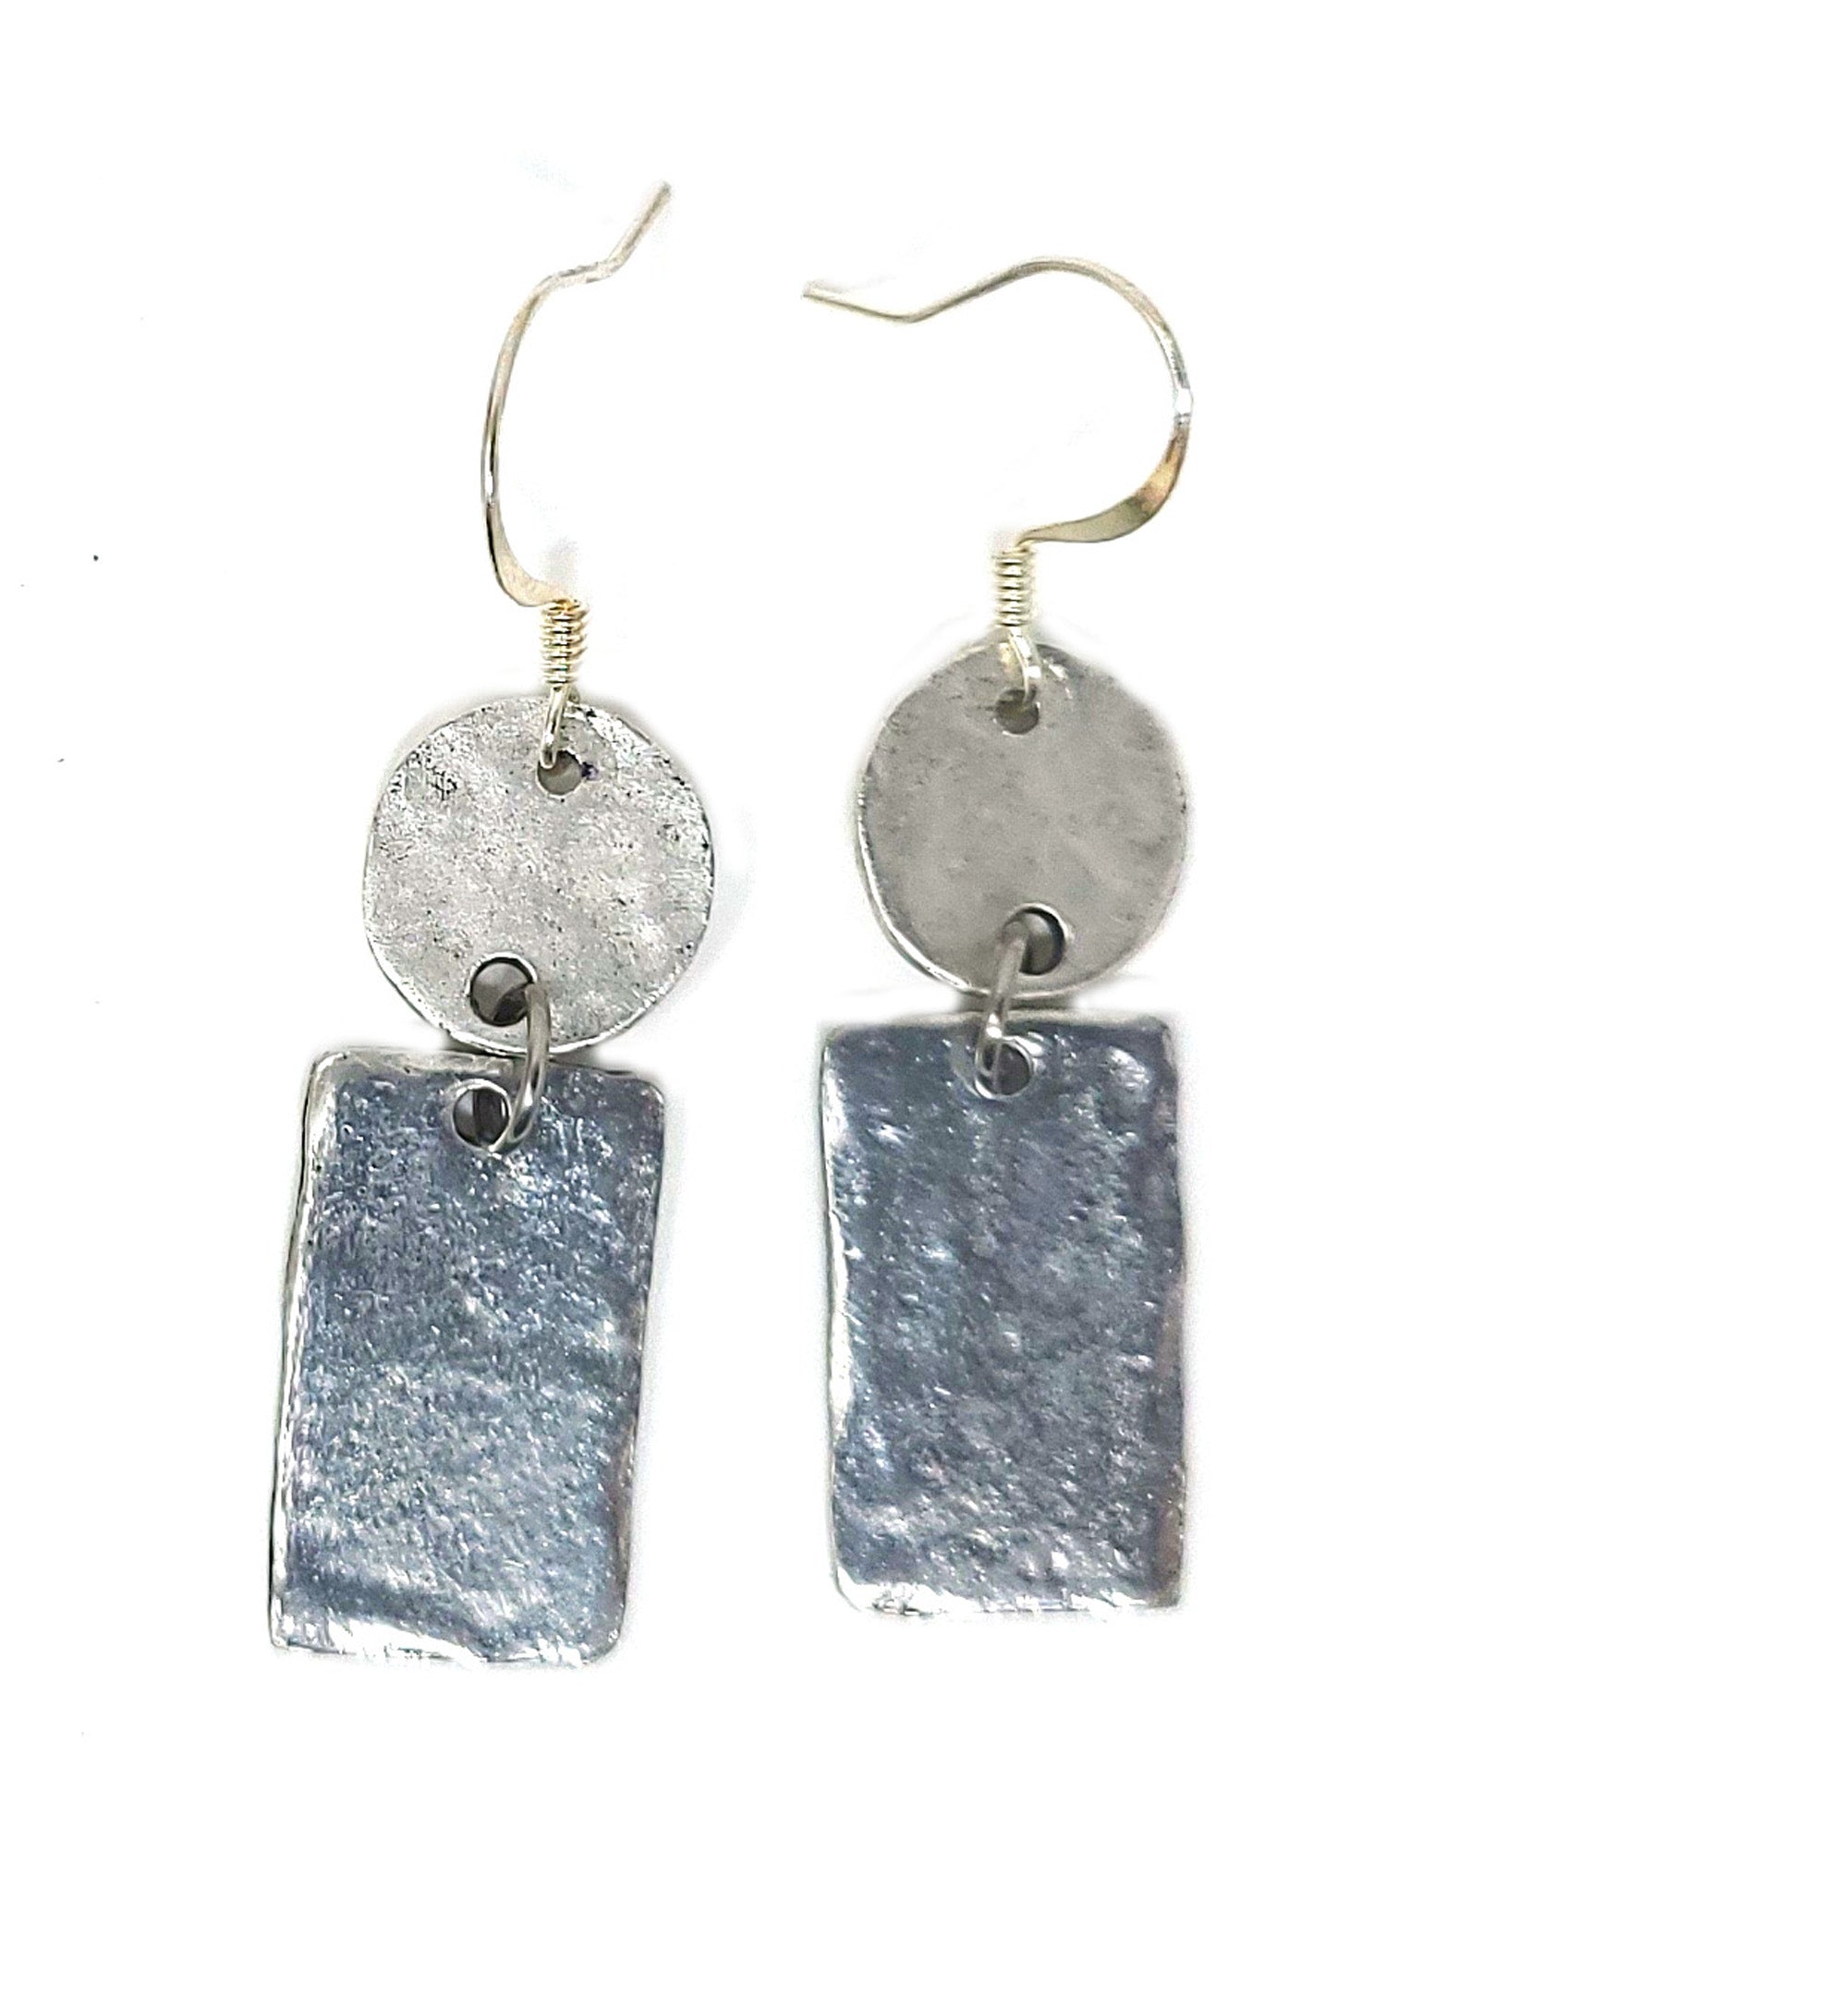 Rustic hammered pewter rectangle dangle earrings, minimalist earrings in gold or silver